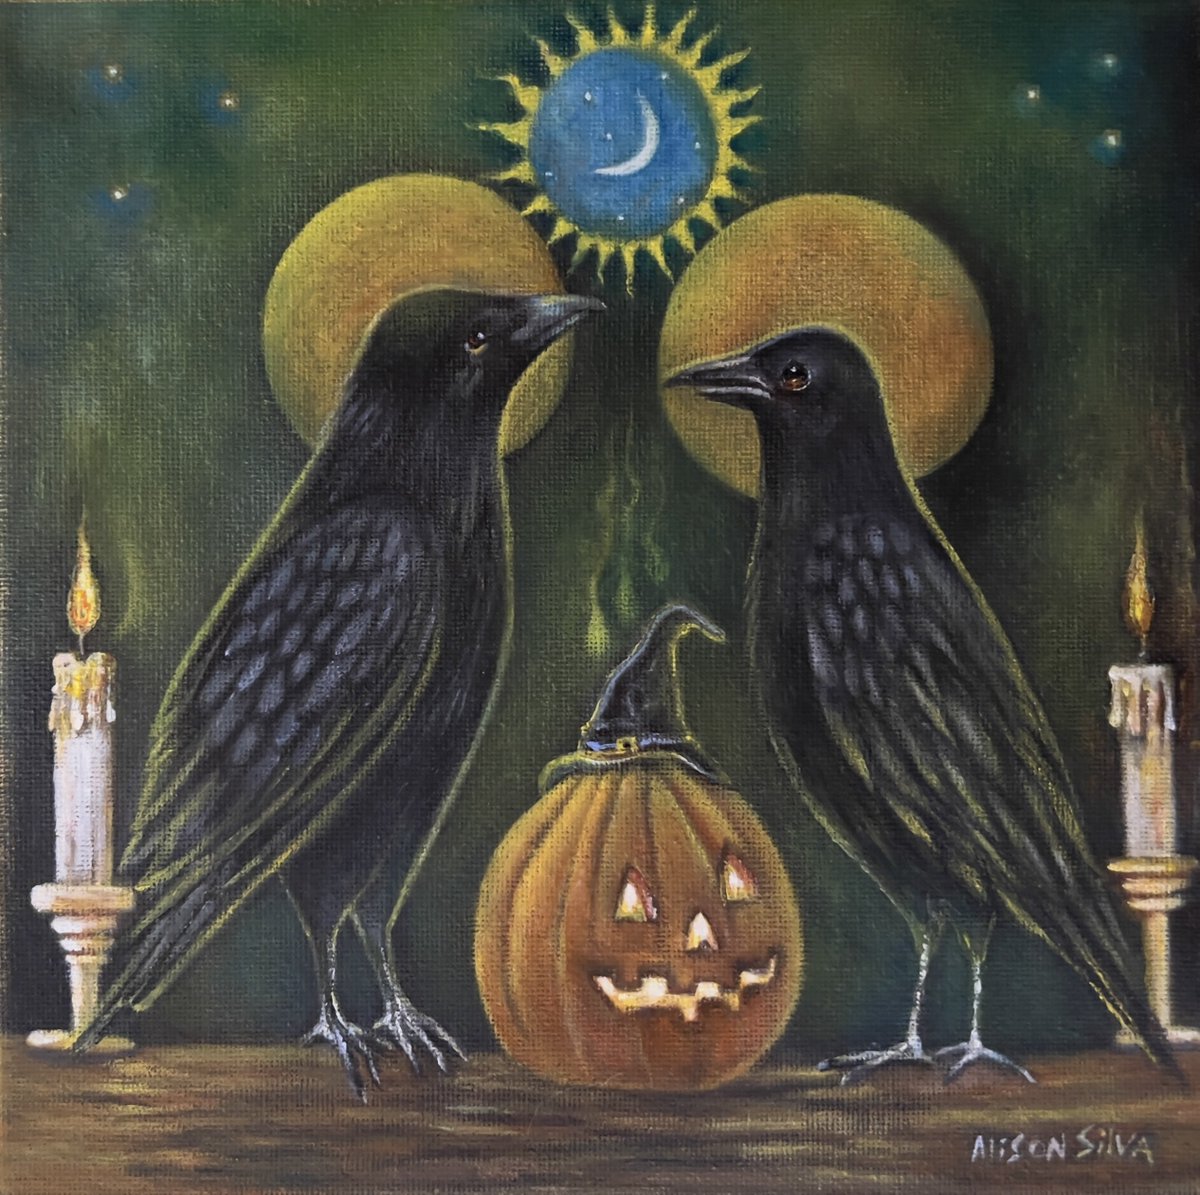 Getting into the spirit of things with these two charming crows, and their witchy Jack-o-lantern friend. 🍂🎃🍂 🖤✨🕯️🌠

Title: The Ritual 
Size: 8” x 8” 

DM me for inquiries 🌿✨🎨#halloweenspirit #artist #art #Halloween #painting #PumpkinSeason #spiritualgathering #Fall2022